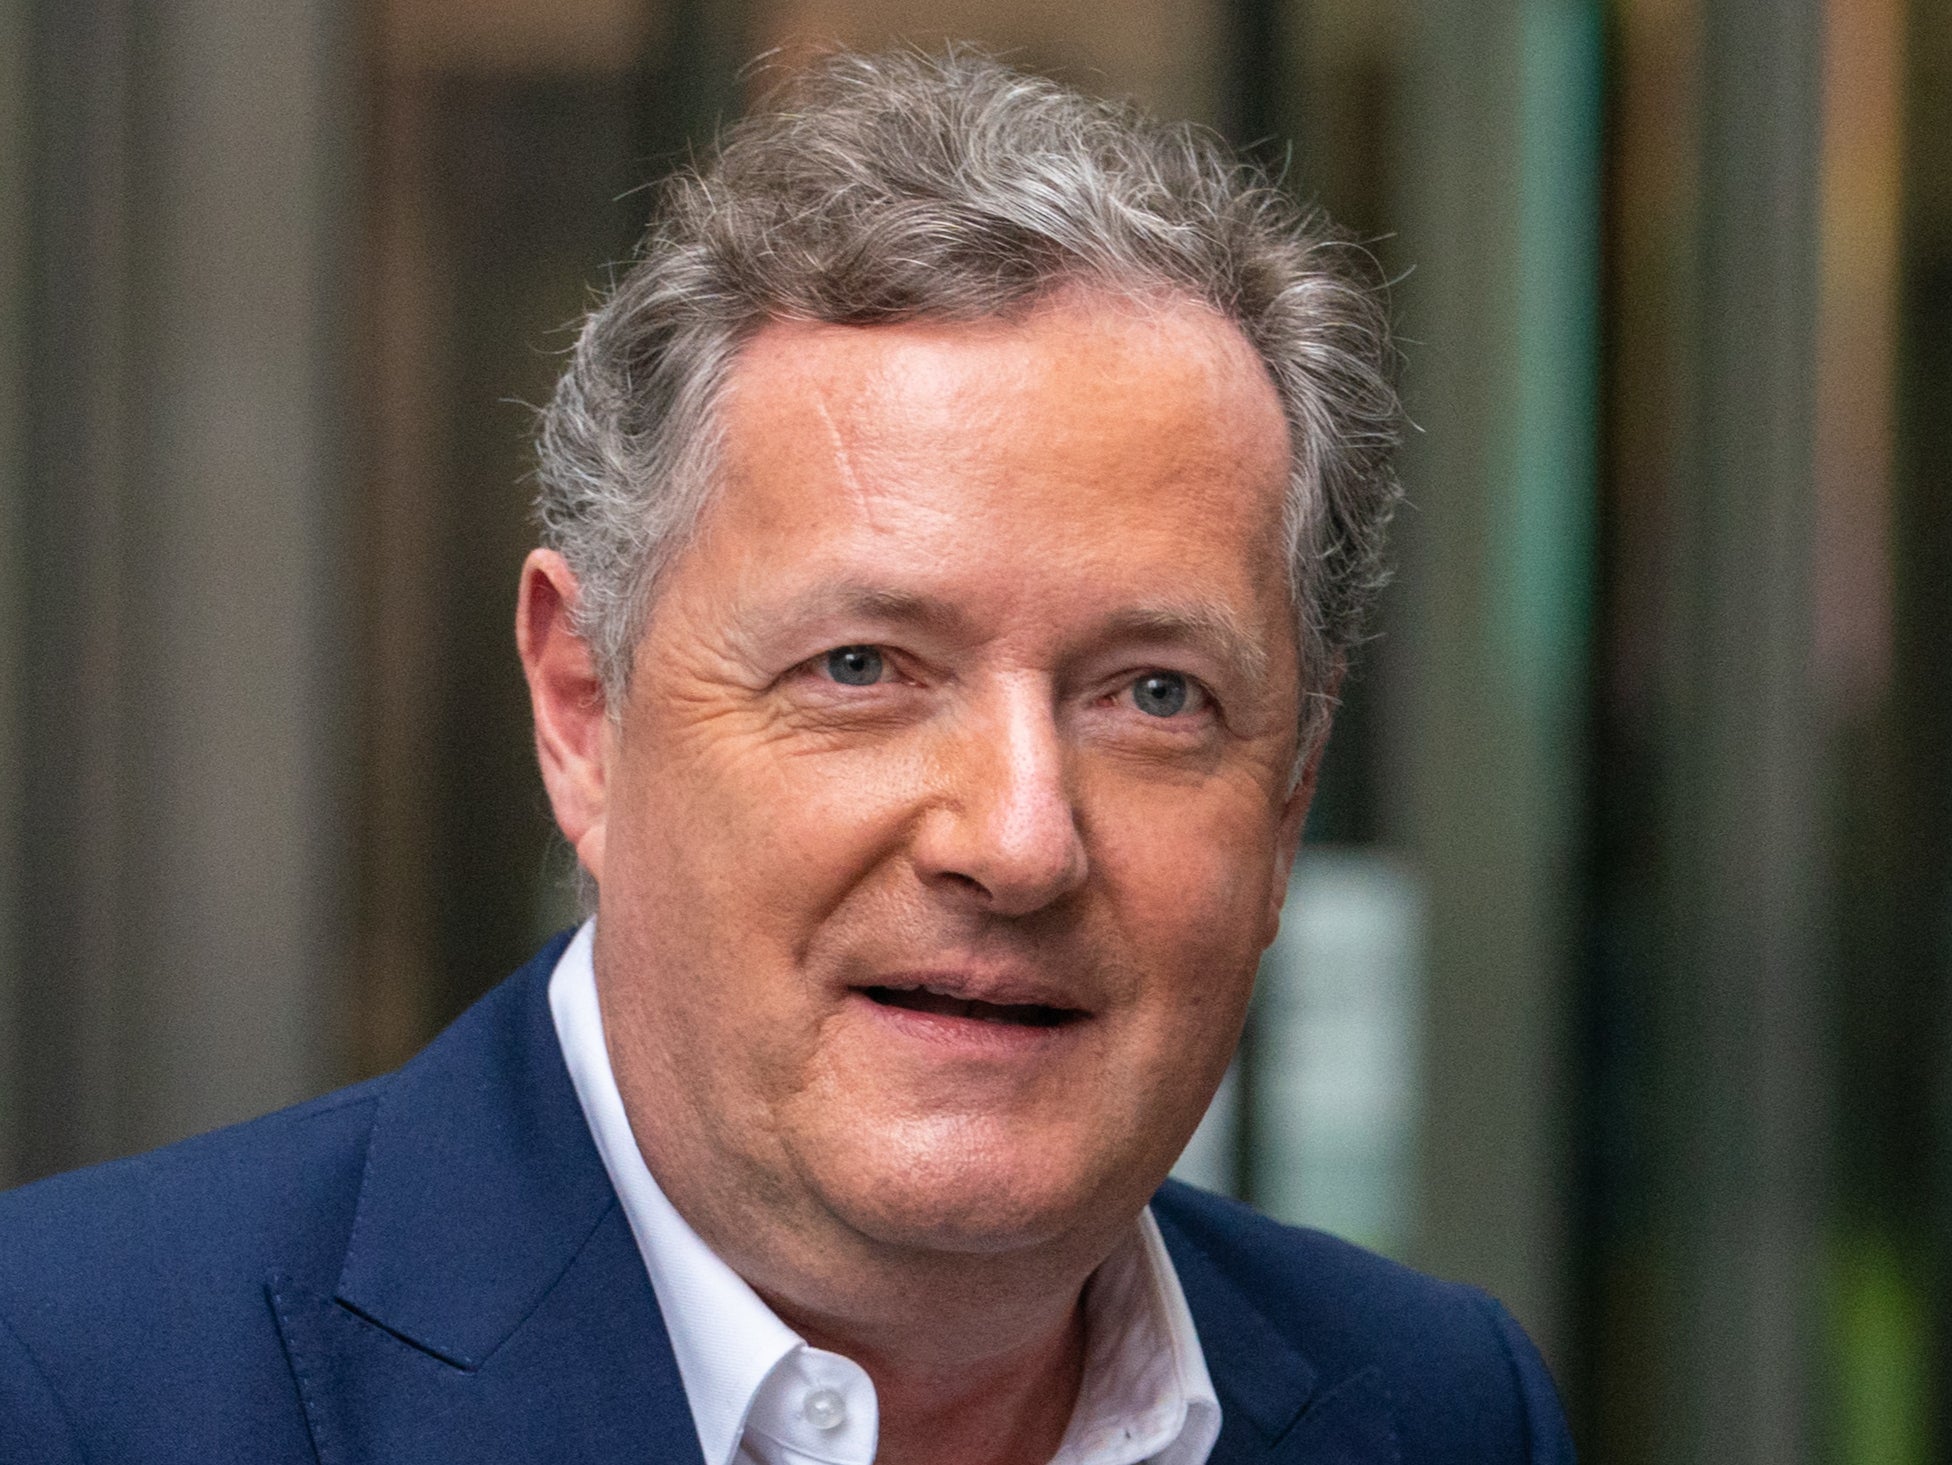 Viewers have called the ‘Piers Morgan Uncensored’ host to apologise for his ‘misogynistic’ comments